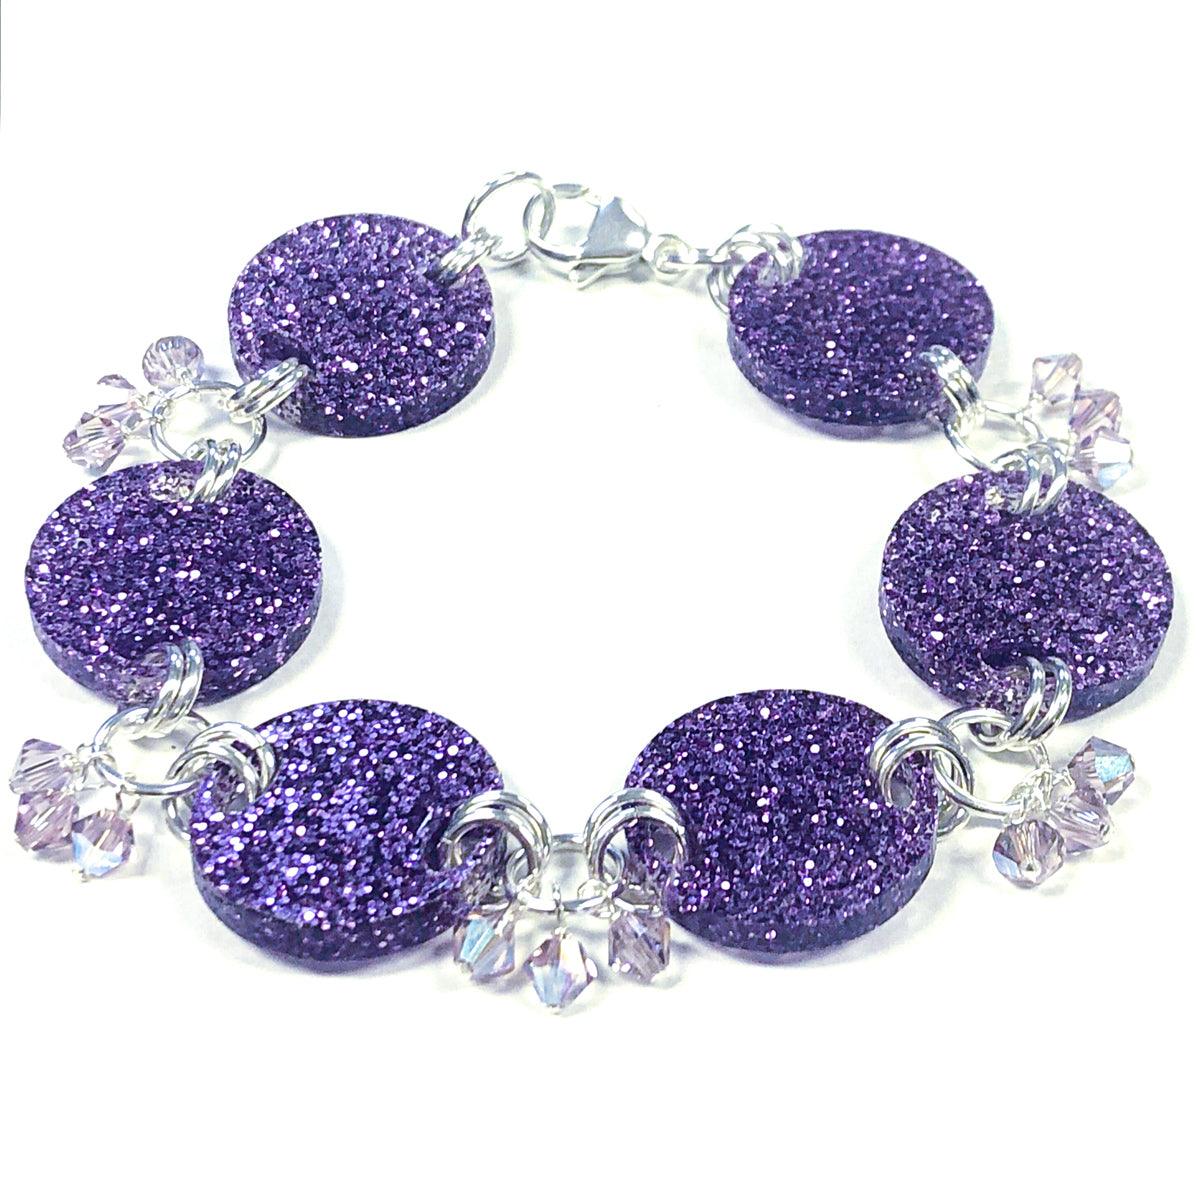 Sparkle and Shimmer Bracelet Kit - Too Cute Beads